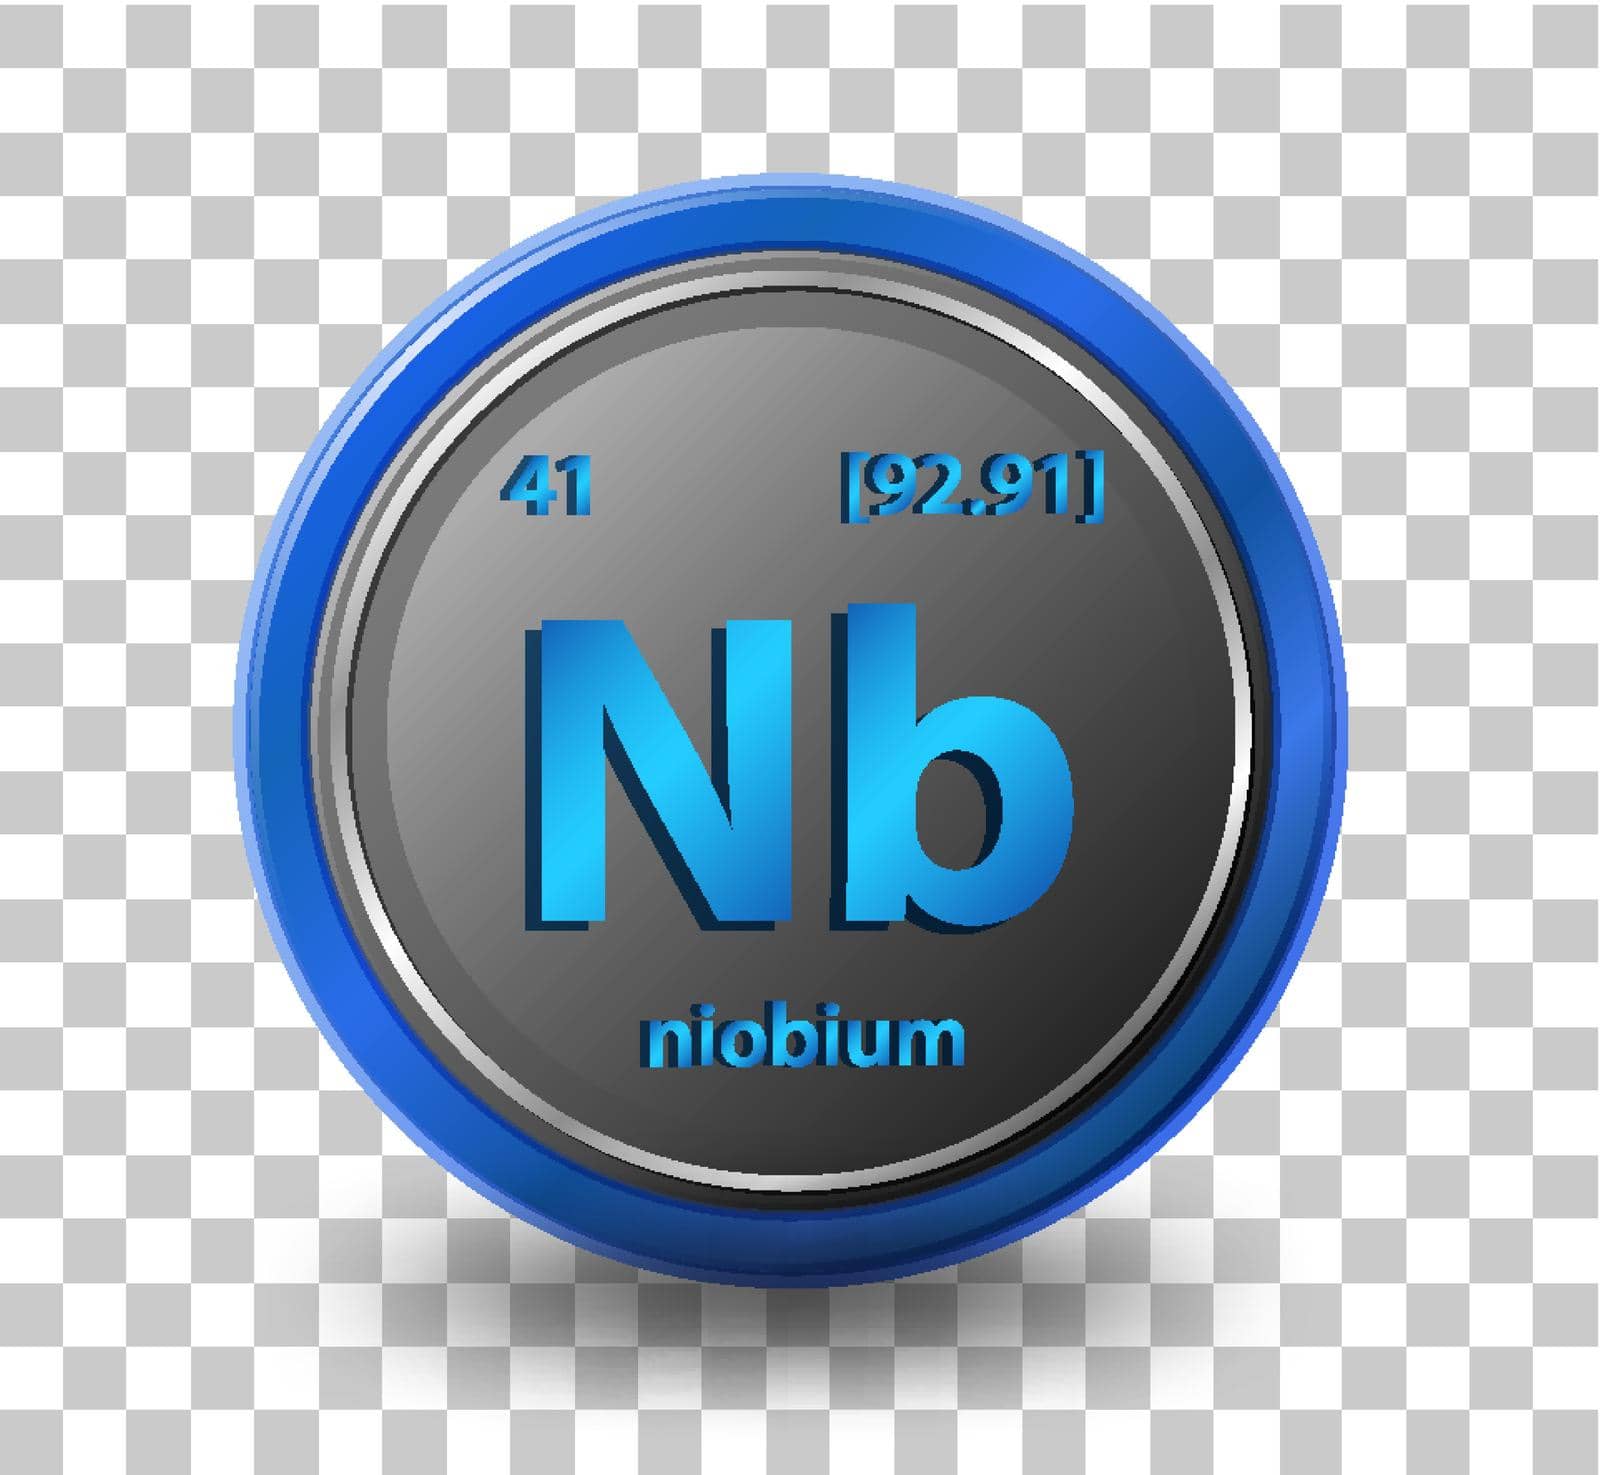 Niobium chemical element. Chemical symbol with atomic number and atomic mass. illustration